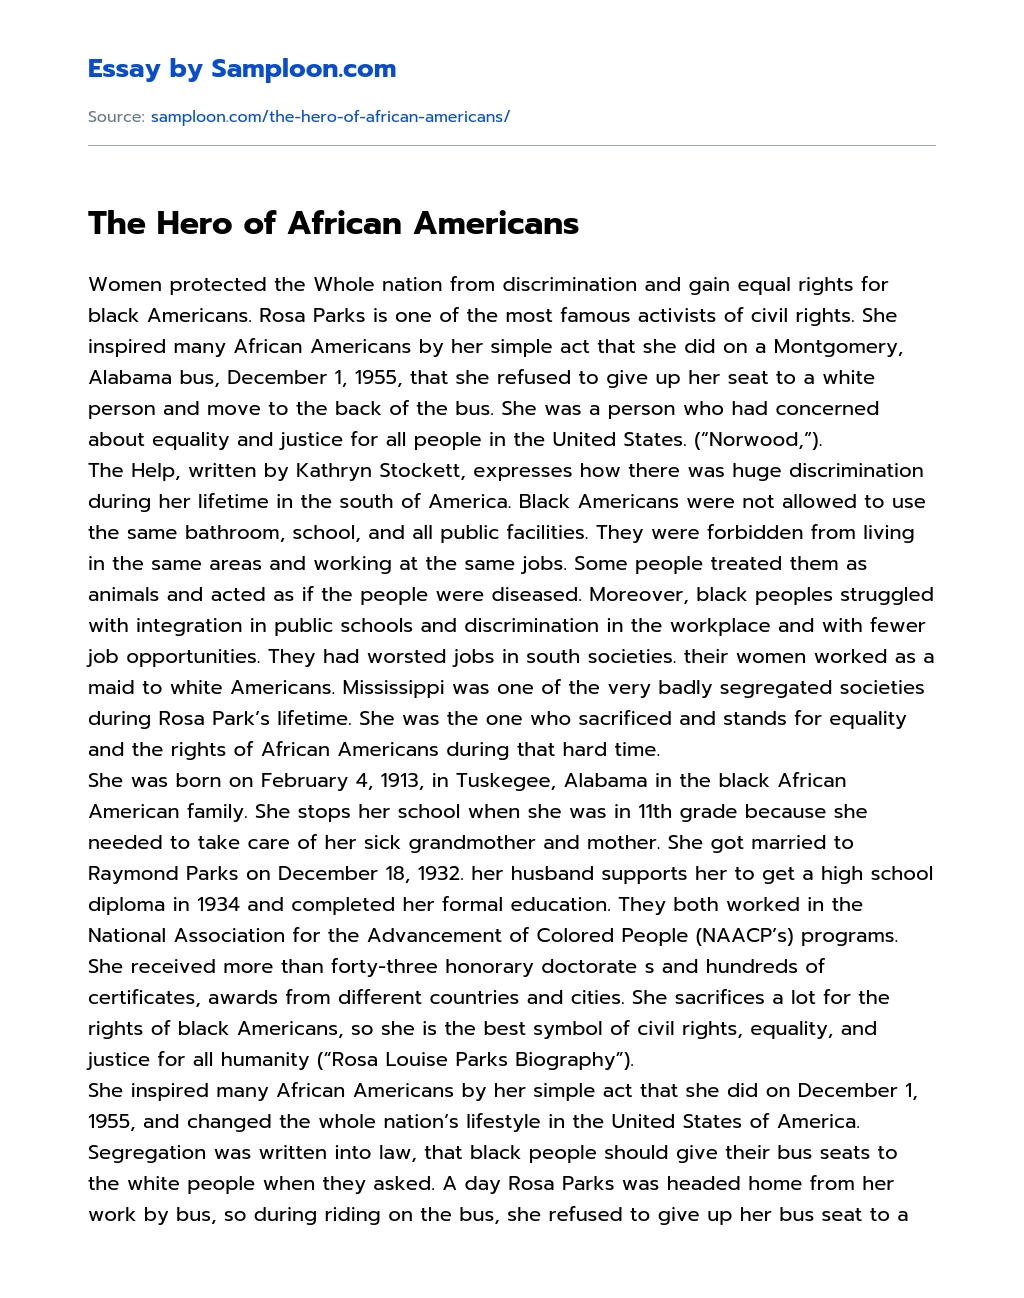 The Hero of African Americans essay